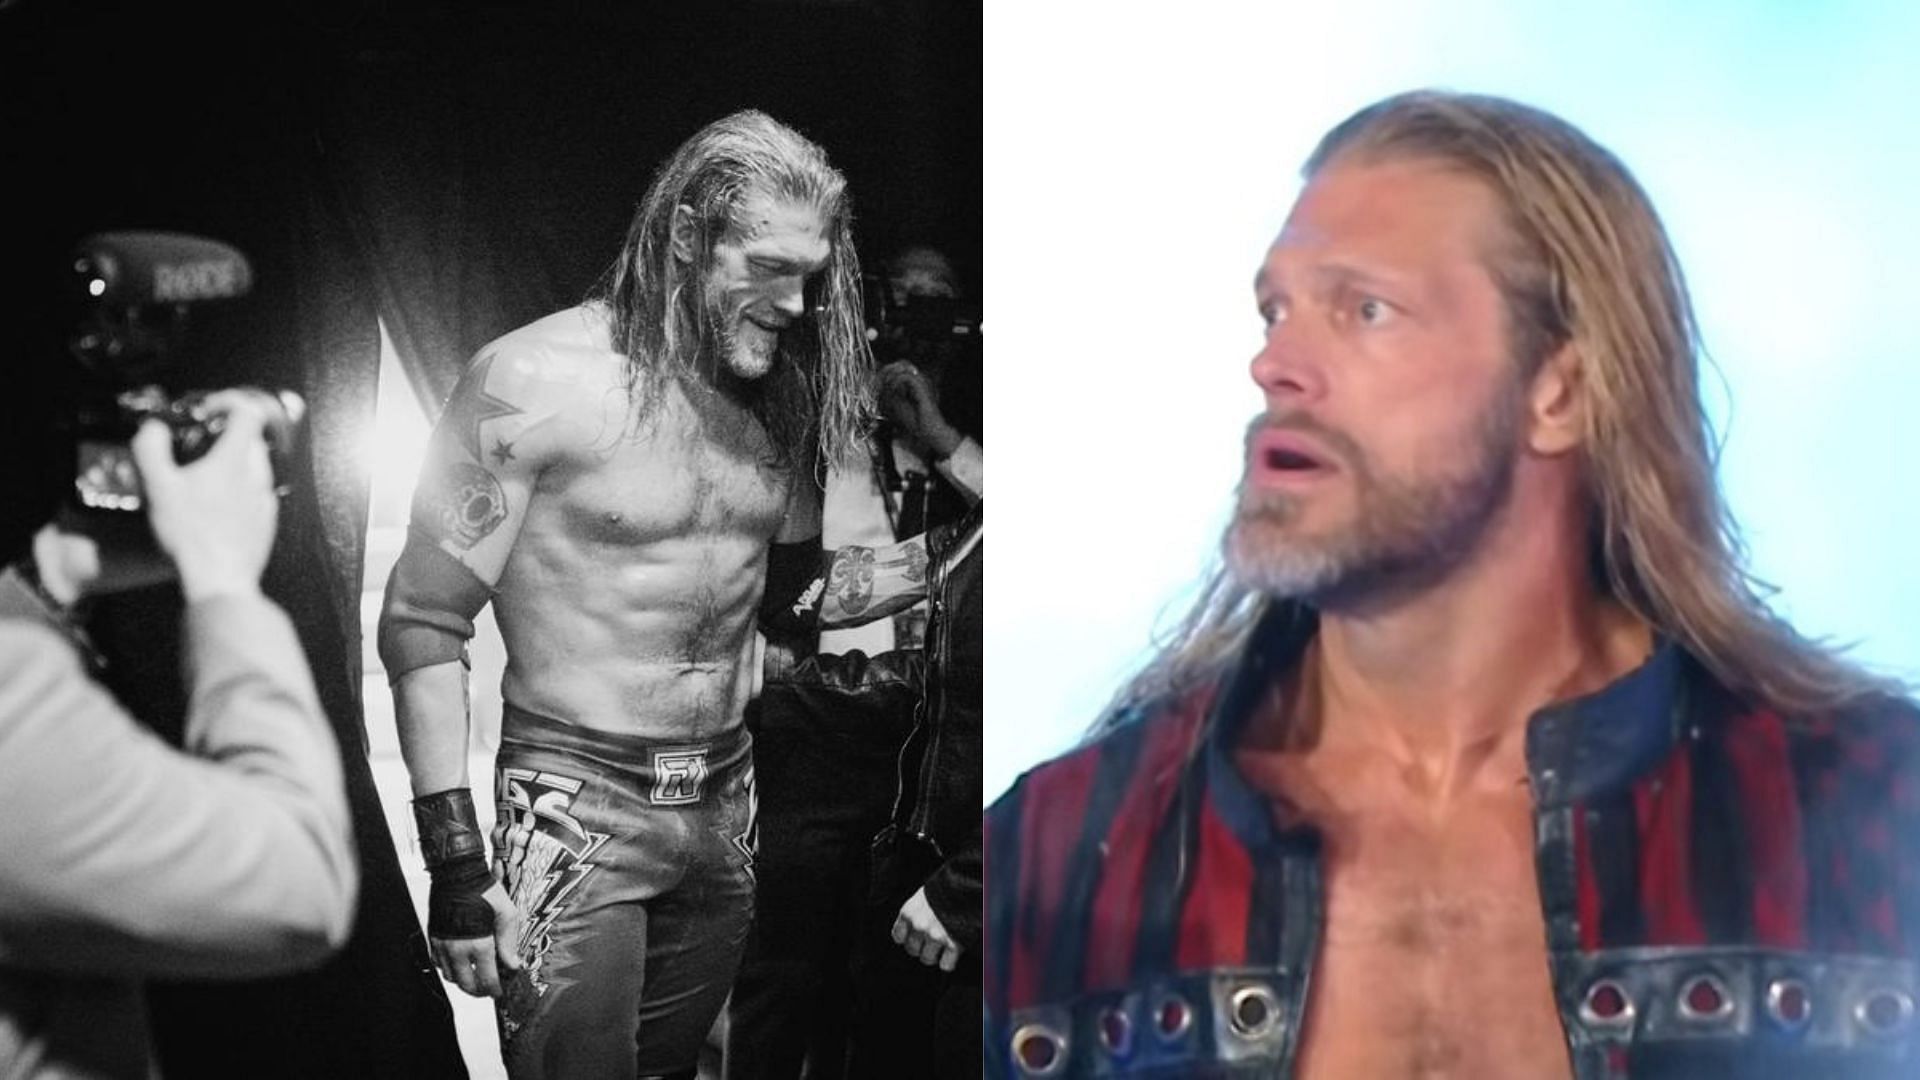 WWE Superstar Edge is a former Intercontinental Champion